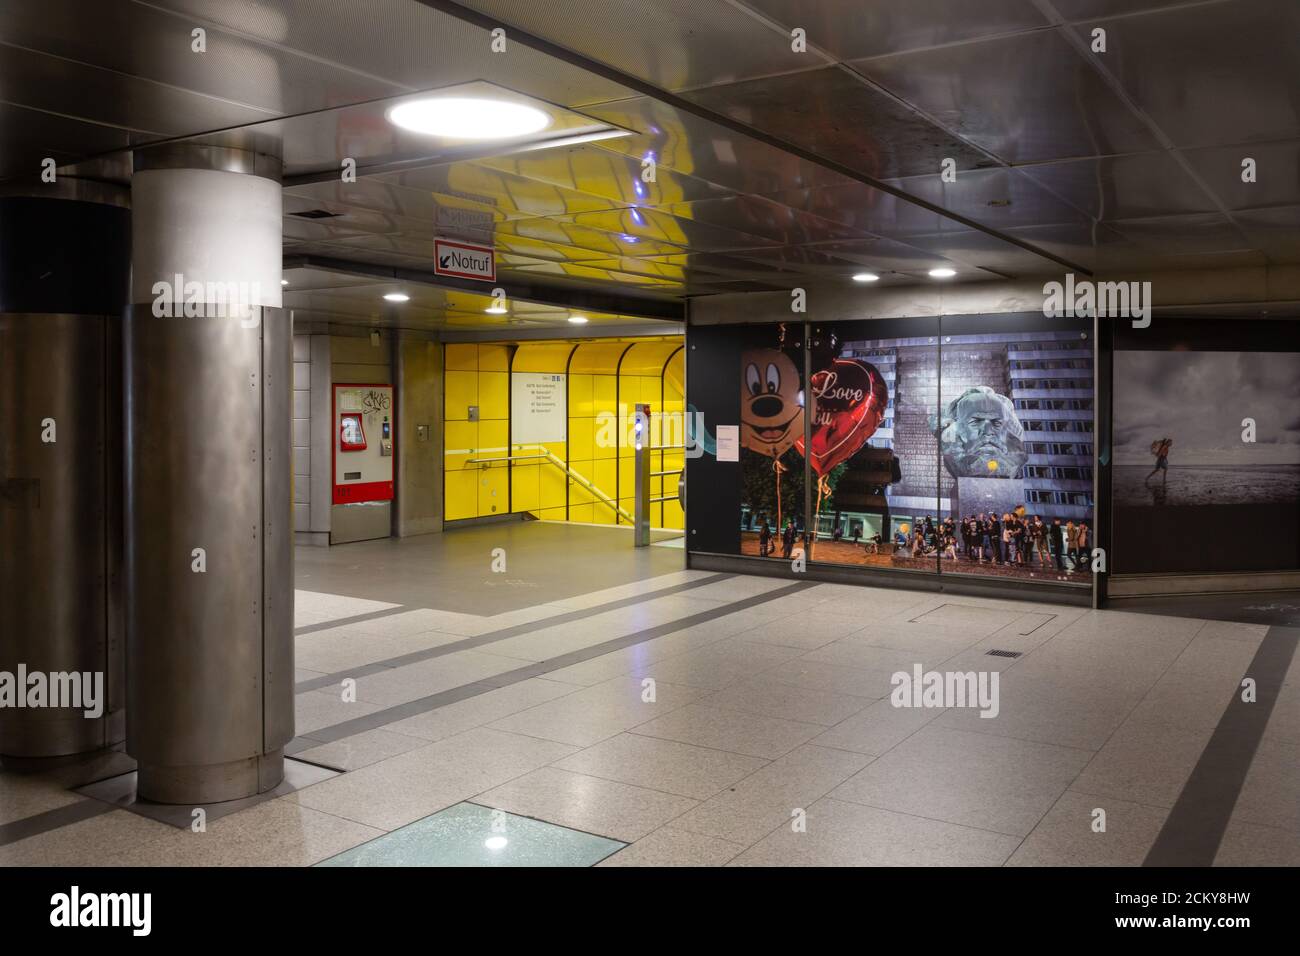 Underground Station Heussallee / Museumsmeile, Bonn, Germany. Stock Photo